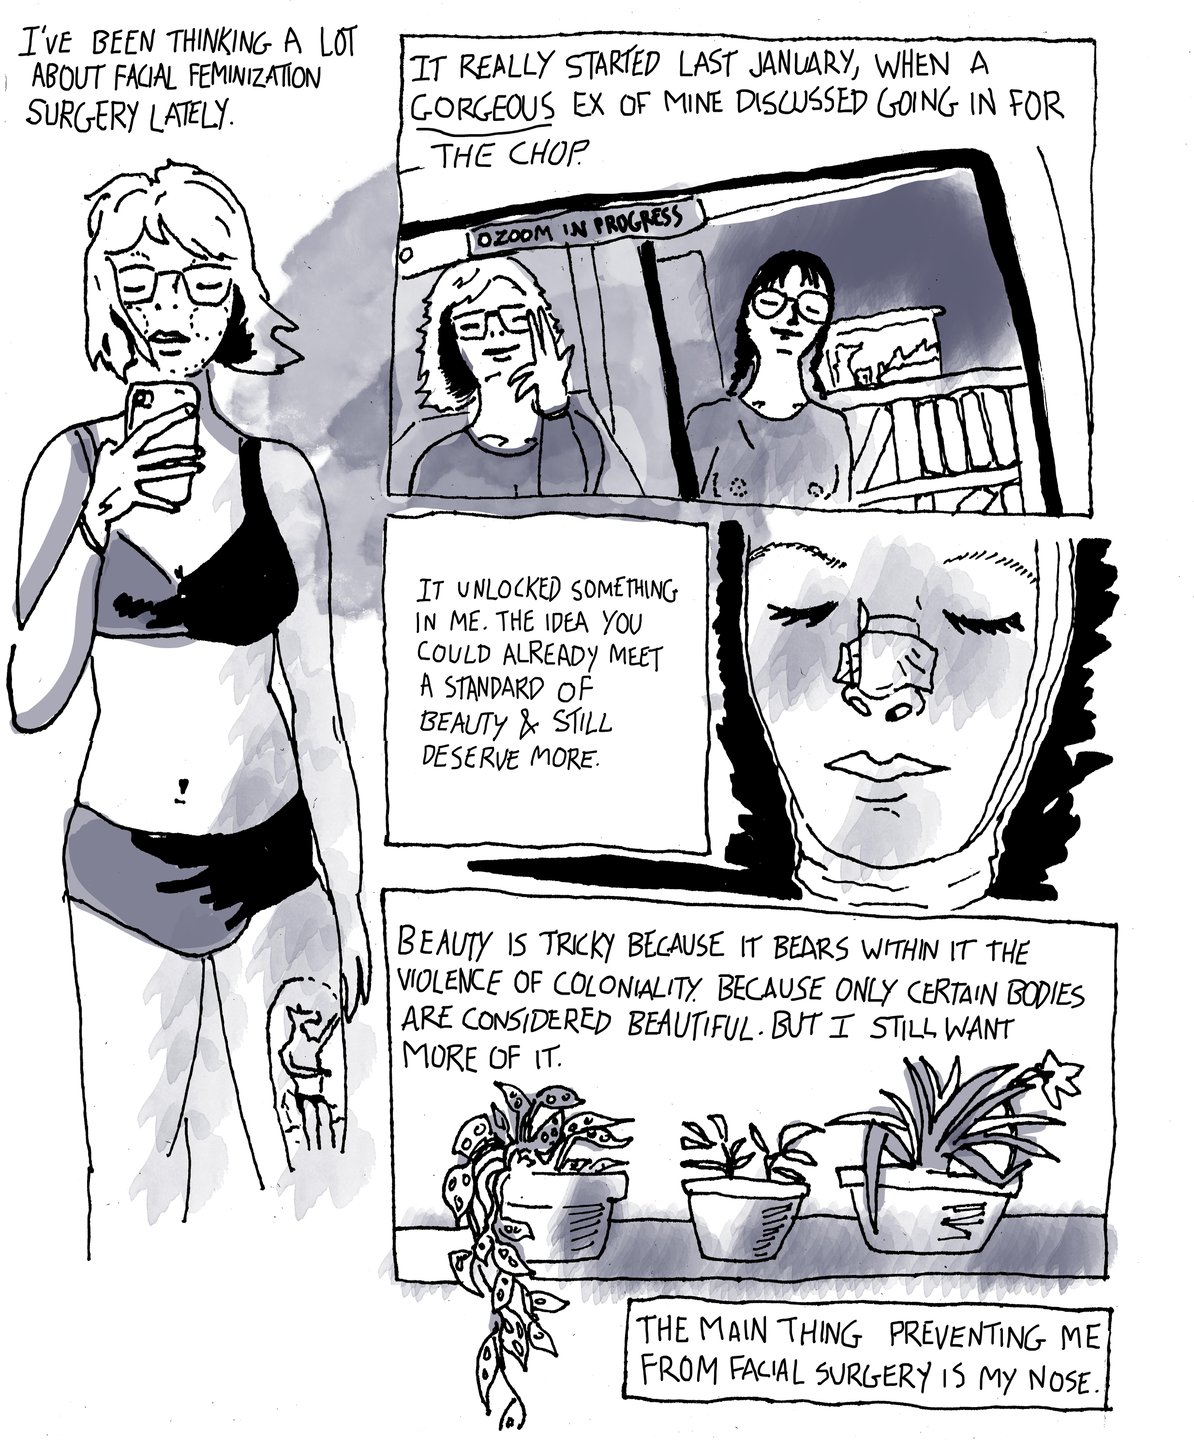 This comic is drawn in black and white with ink and watercolor. The text is handwritten. The comic style is realistic but stylized. It is split up into pages and panels within each page. Page one, panel one: a black and white drawing of Zefyr (she/they) in a bikini or bra and underwear. In it, her hair is chin-length and she has glasses. They are holding a phone. The text reads, “I’ve been thinking a lot about facial feminization surgery lately. Panel two: a drawing of a zoom between two people. The text reads, “It really started last January, when a gorgeous ex of min discussed going in for the chop. Panel three: A close-up drawing of Zefyr’s face wrapped in gauze with a bandage over their nose. The text reads, “It unlocked something in me. The idea you could already meet a standard of beauty and still deserve more.” Panel four is of three house plants in pots. The text reads, “ Beauty is tricky because it bears within at the violence of coloniality. Because only certain bodies are considered beautiful. But I still want more of it. The main thing preventing me from facial feminization surgery is my nose.”